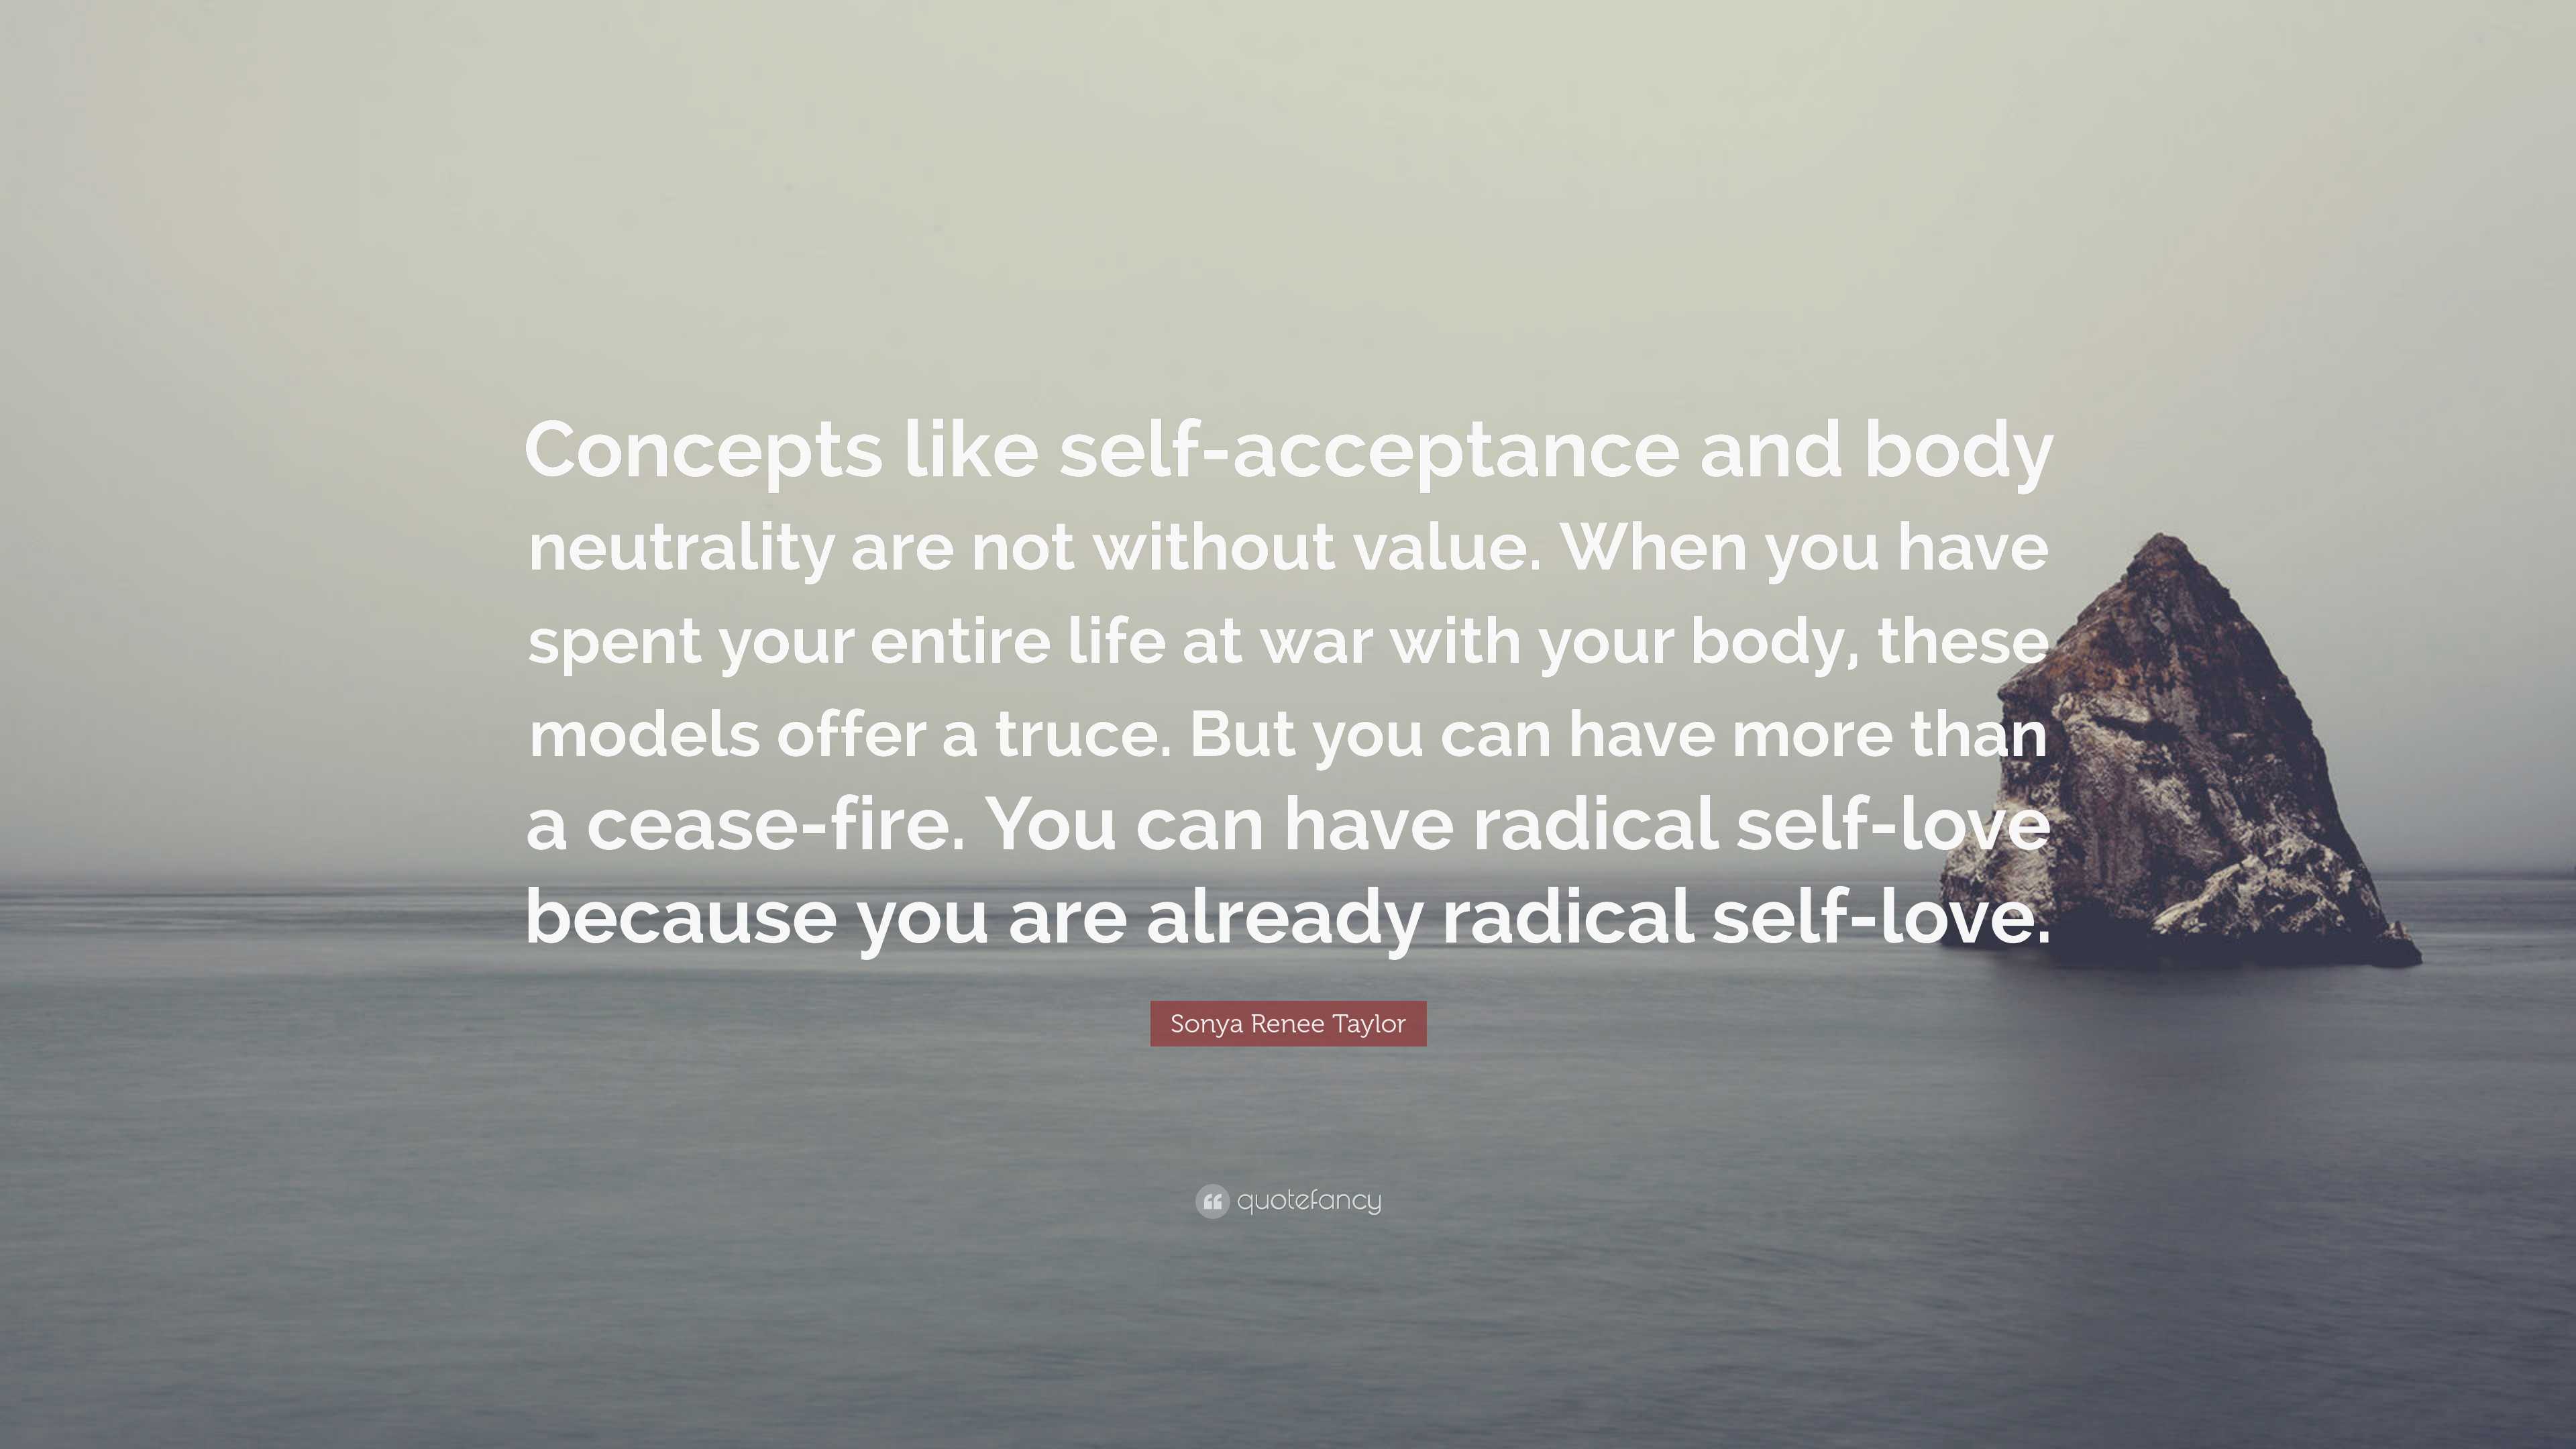 Sonya Renee Taylor Quote: “Concepts like self-acceptance and body ...